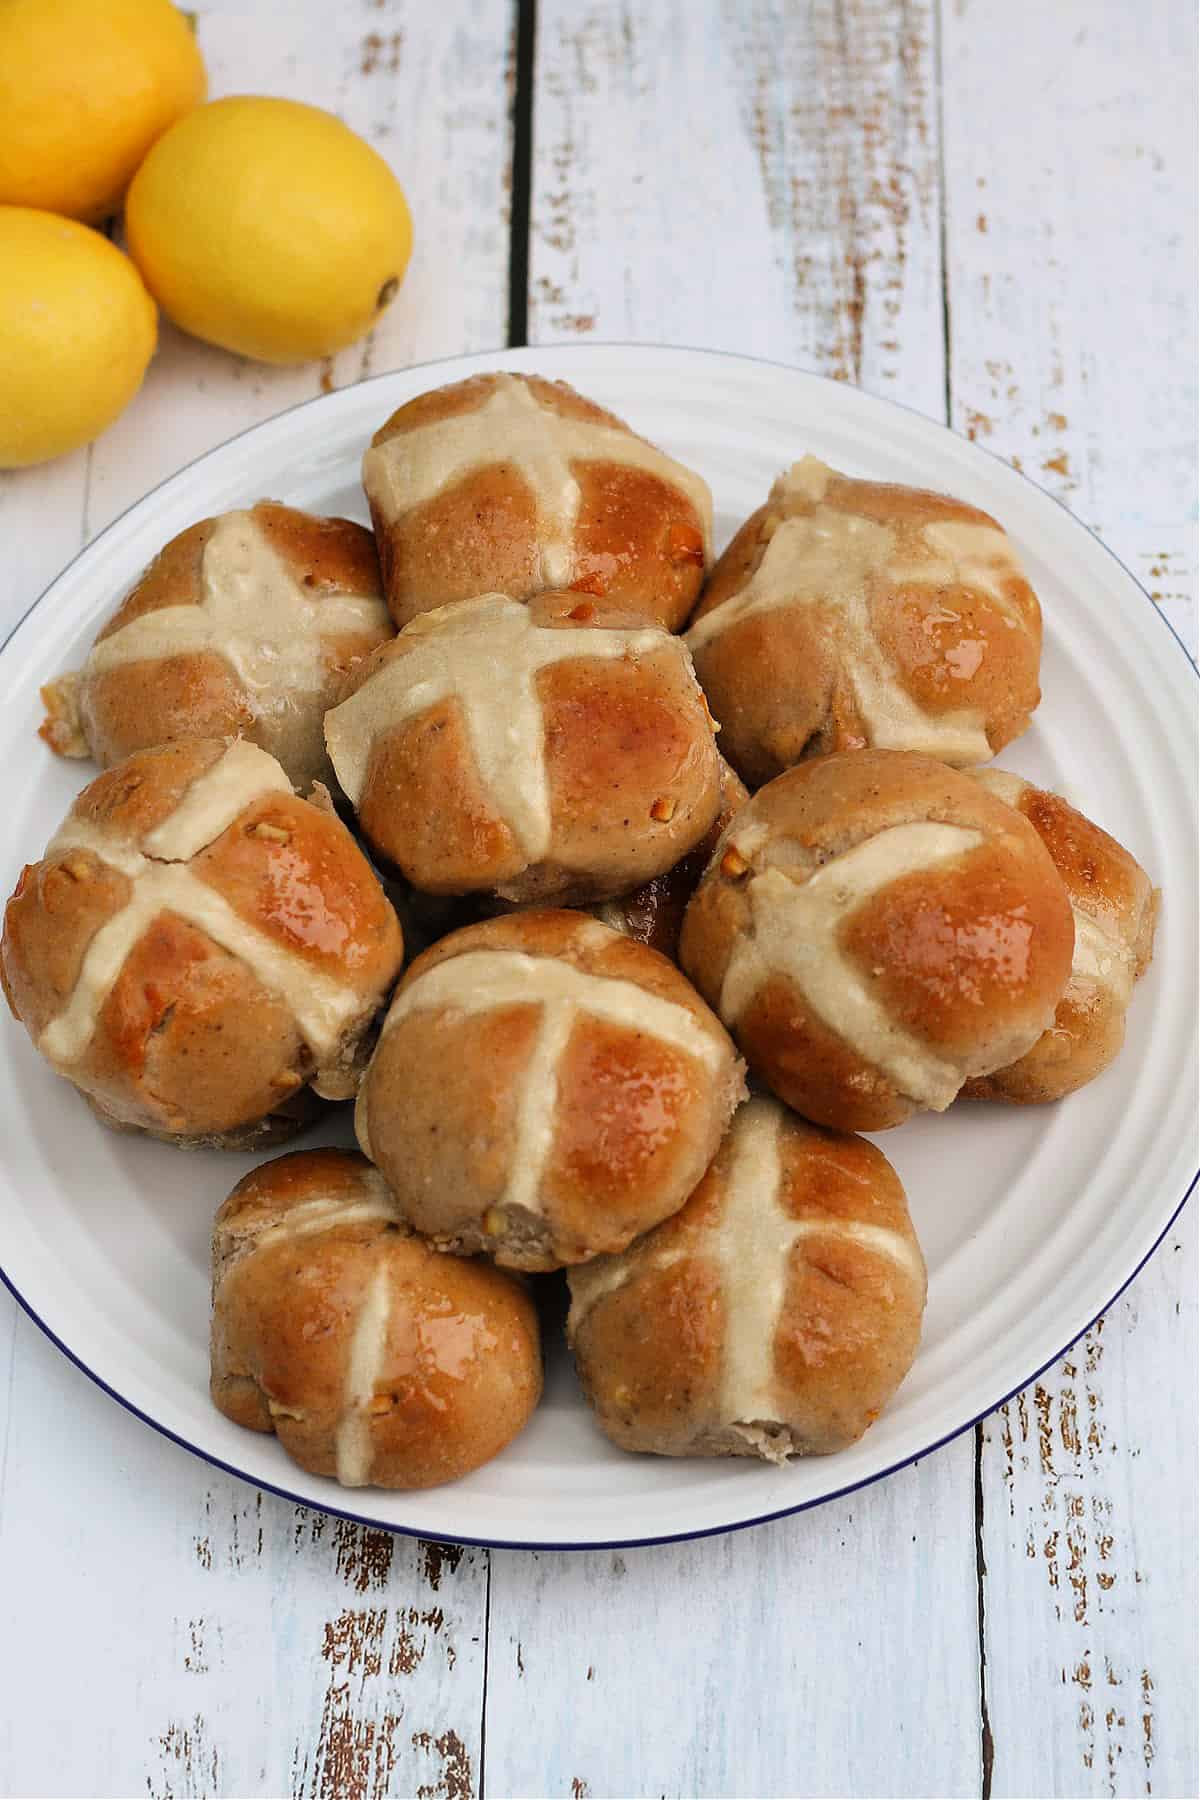 Hot cross buns on a white plate, with lemons in the background. on white wooden surface.